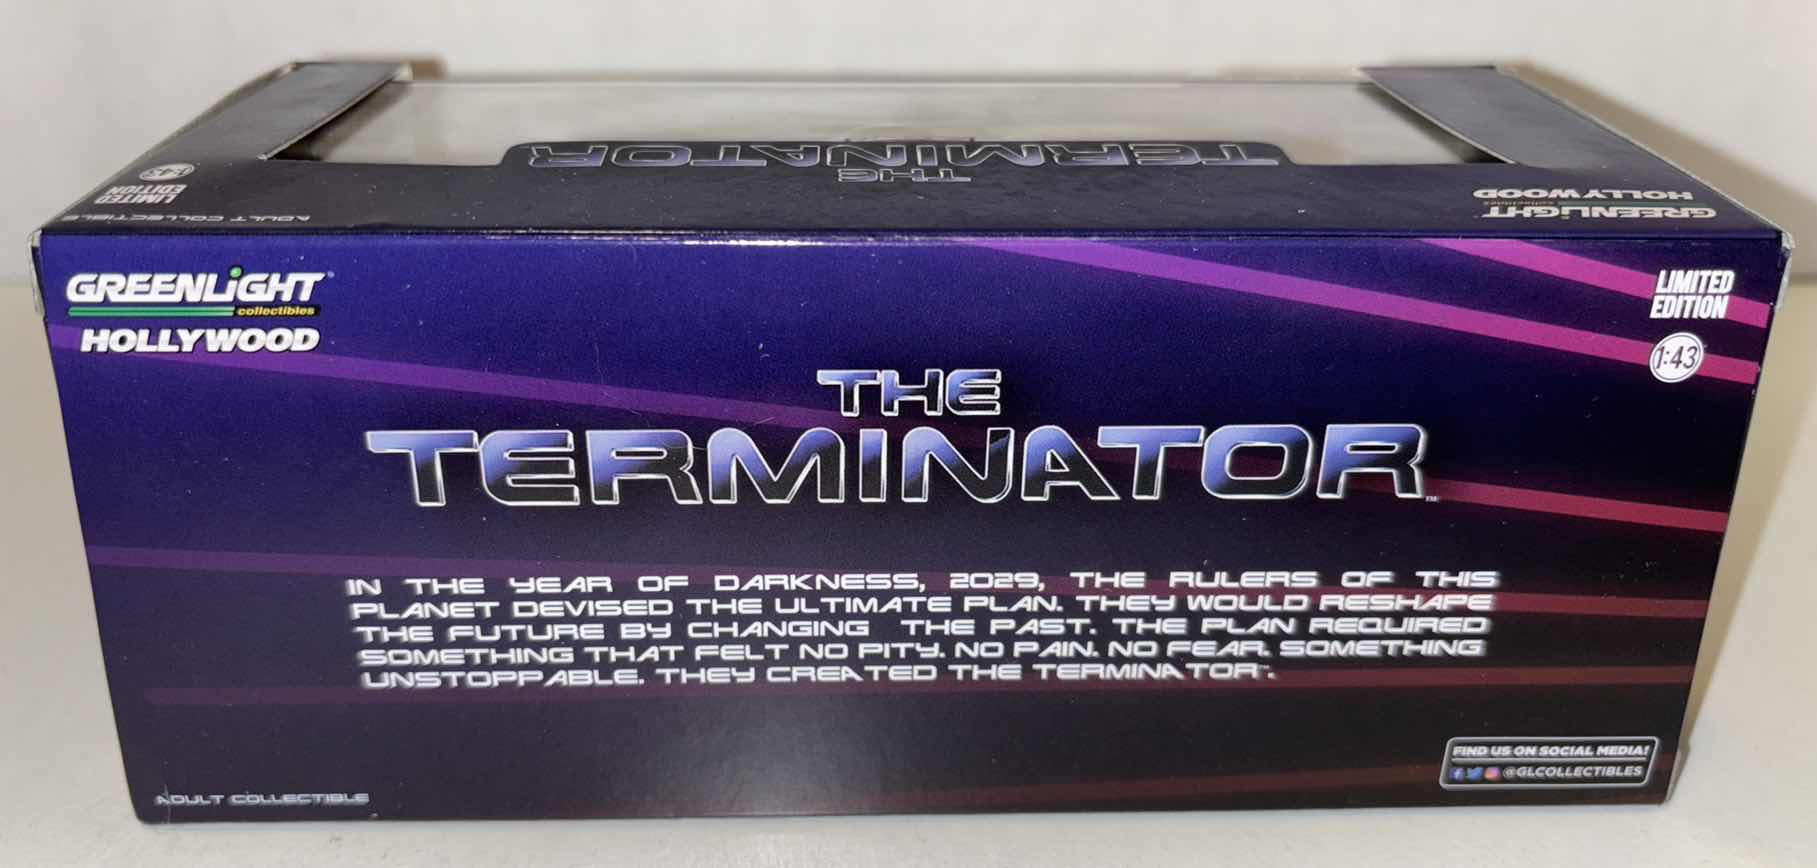 Photo 3 of NEW GREENLIGHT COLLECTIBLES HOLLYWOOD RIDES LIMITED EDITION 1:43 SCALE “THE TERMINATOR 1977 DODGE MONACO” DIE-CAST VEHICLE